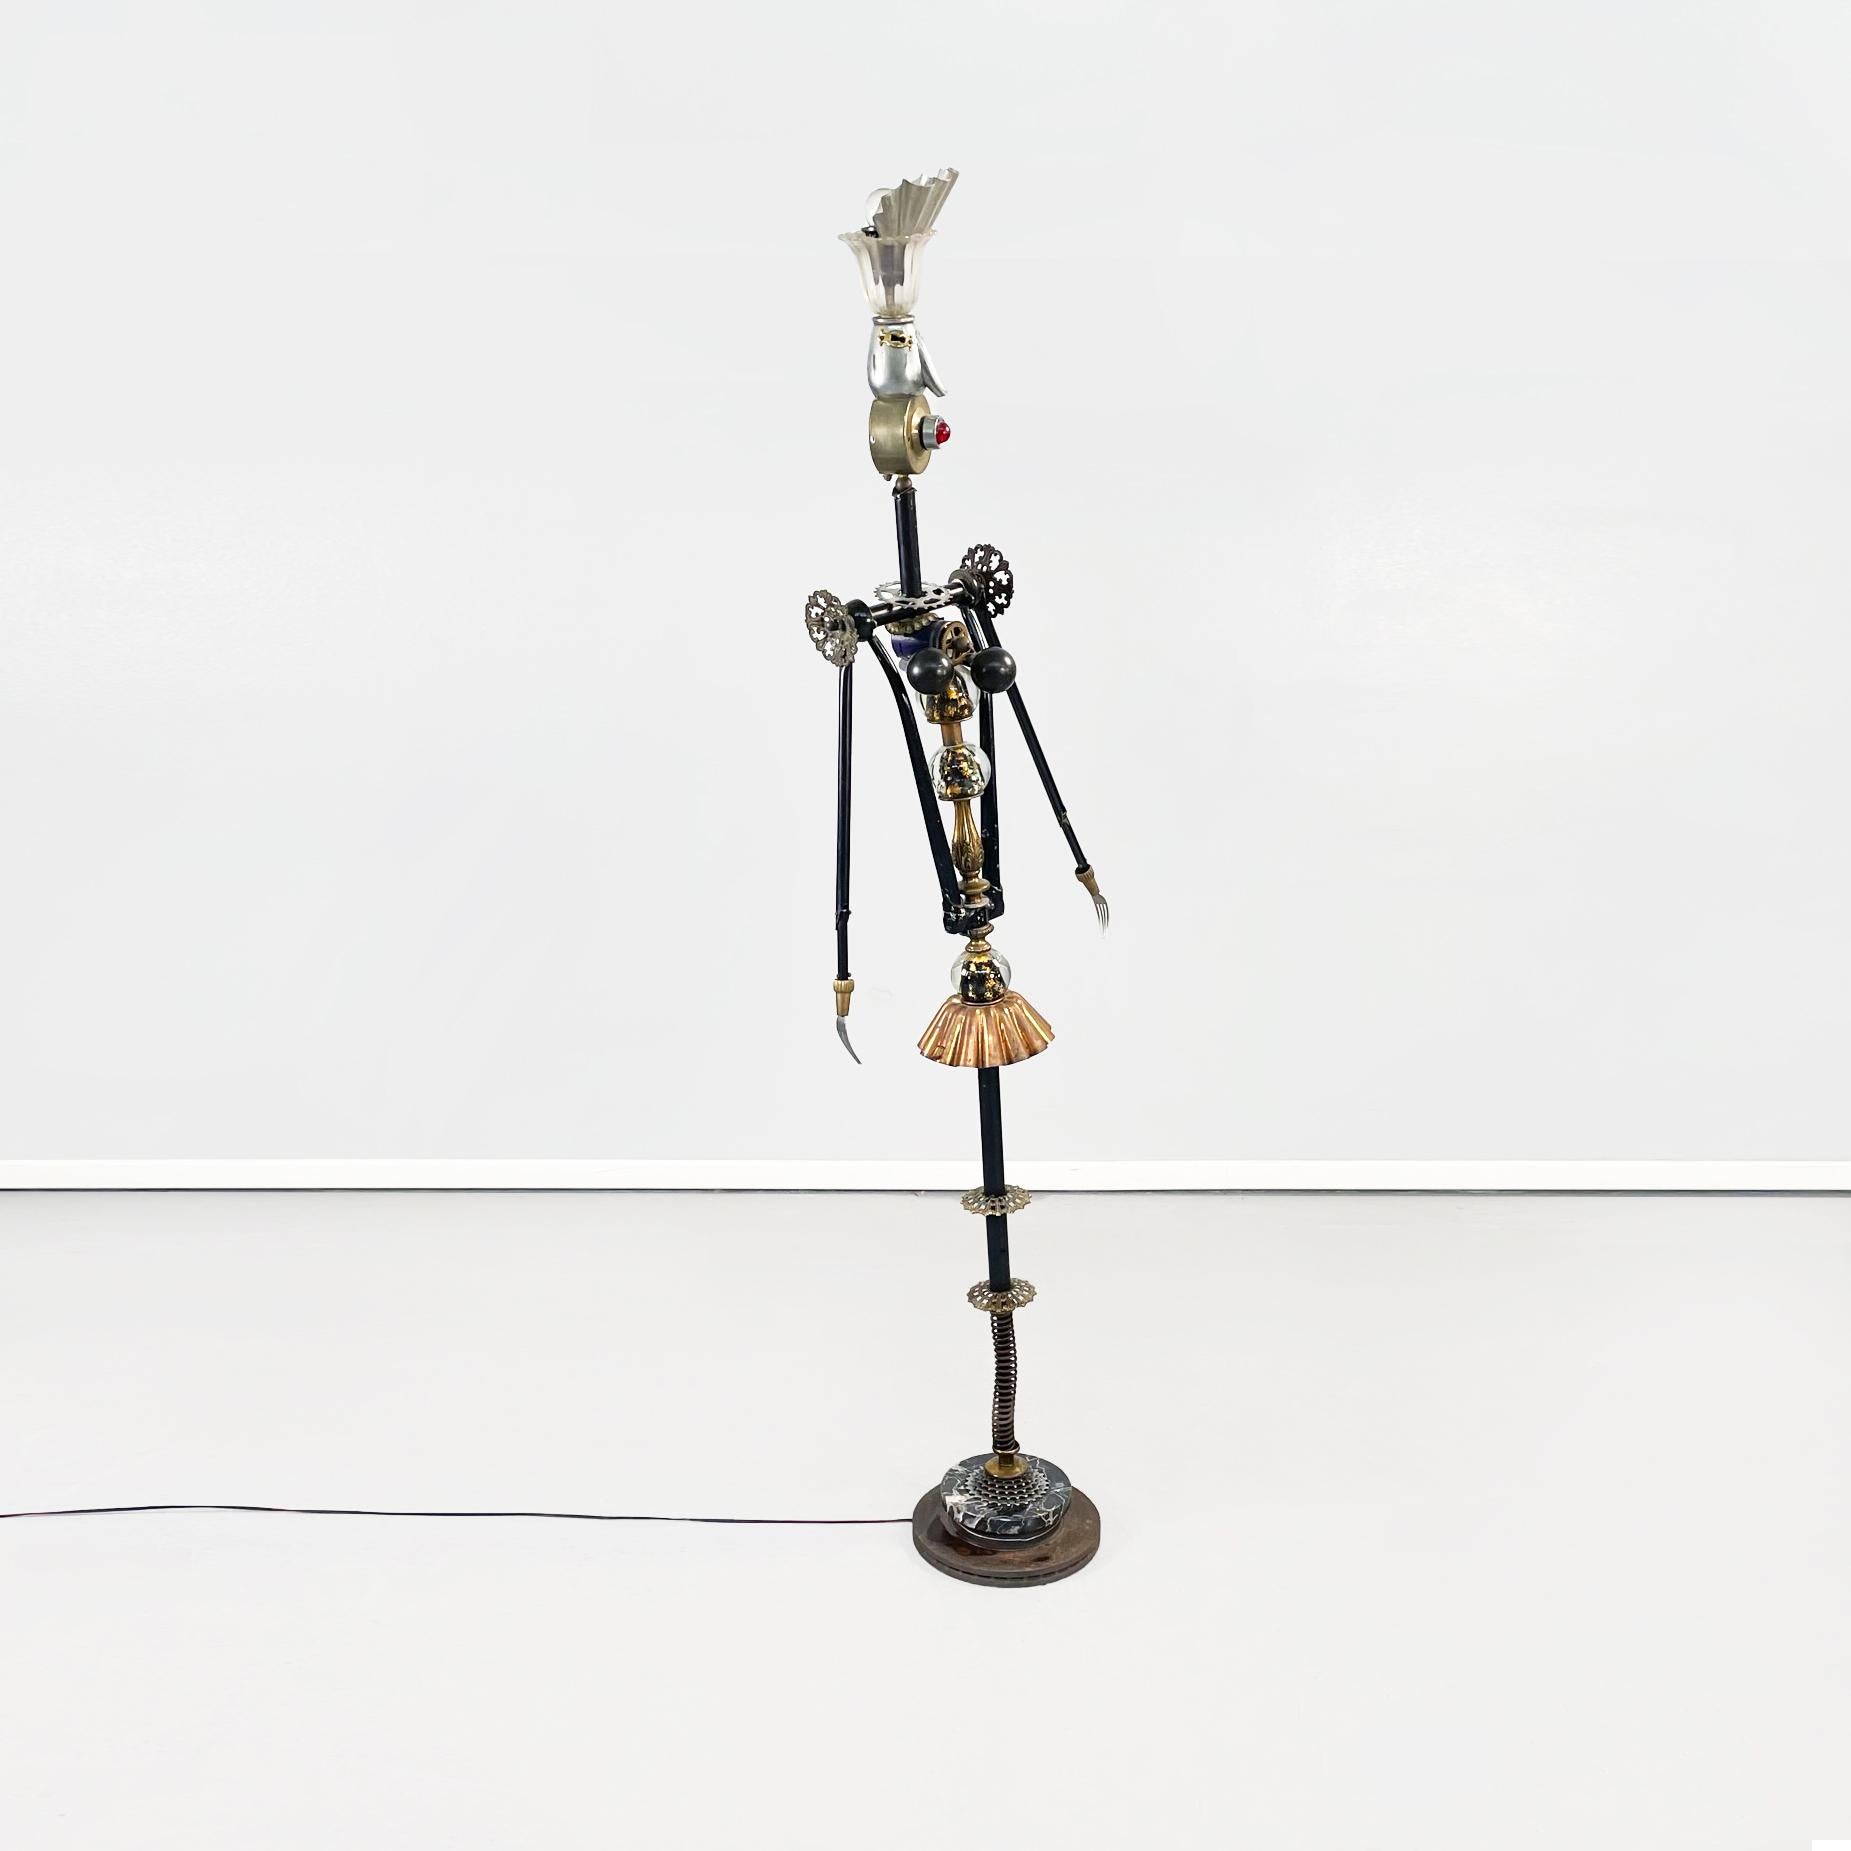 Italian postmodern Sculptures and floor lamps in metal, glass and marble, 2000s
Pair of sculptures and floor lamps with a humanoid shape, in metal, brass, dark marble and glass. These lamps have two lights, one of which is red, both placed at head